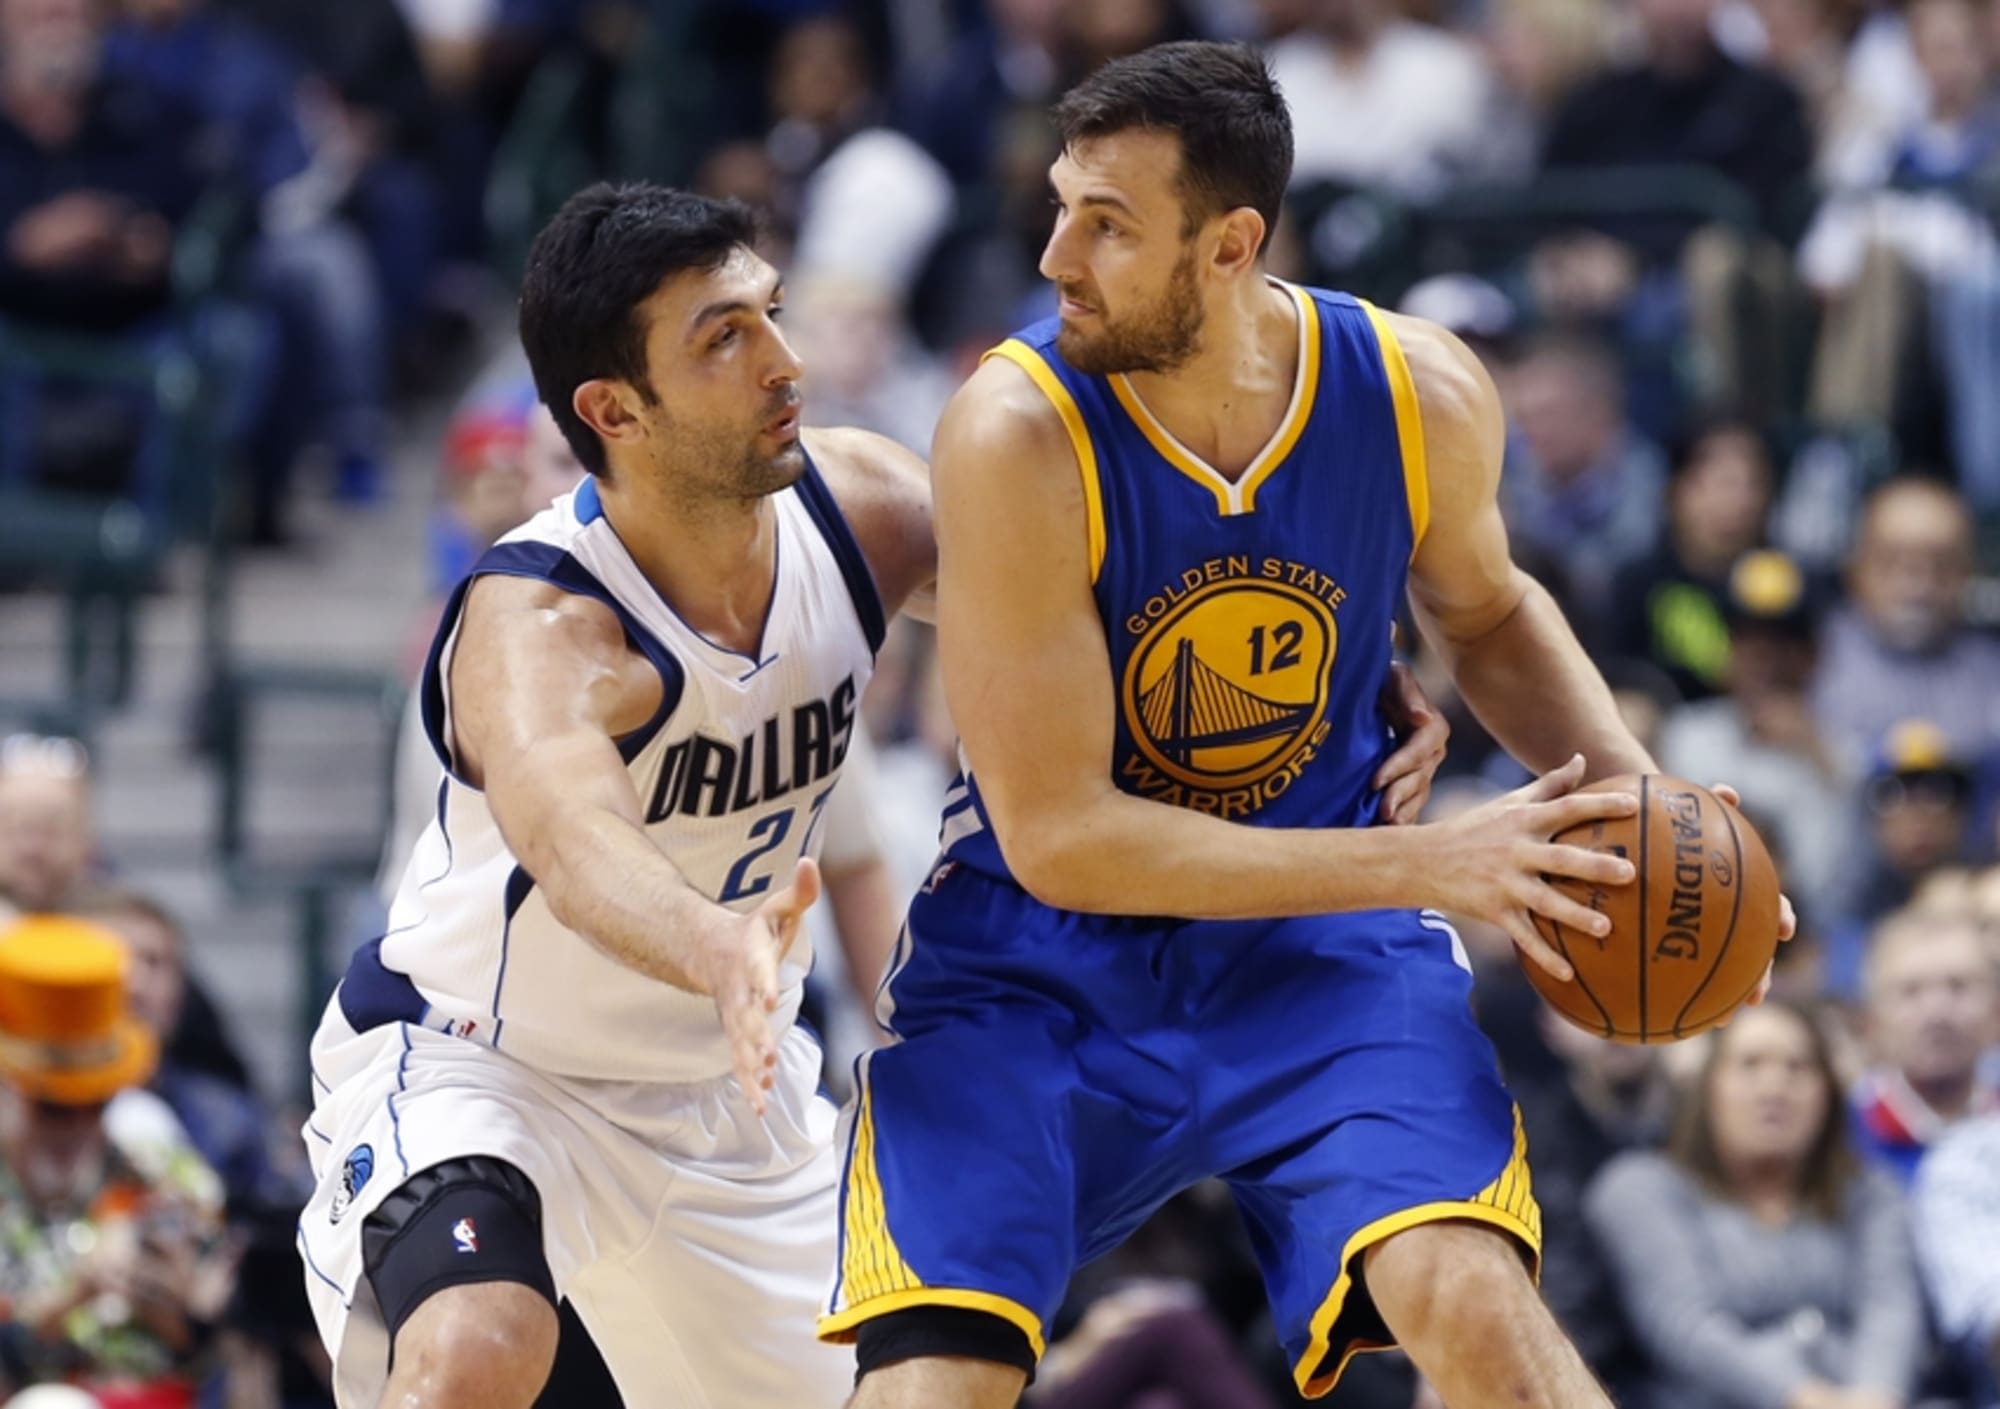 Why Zaza Pachulia started 'liking Dallas' as an NBA rookie in 2003